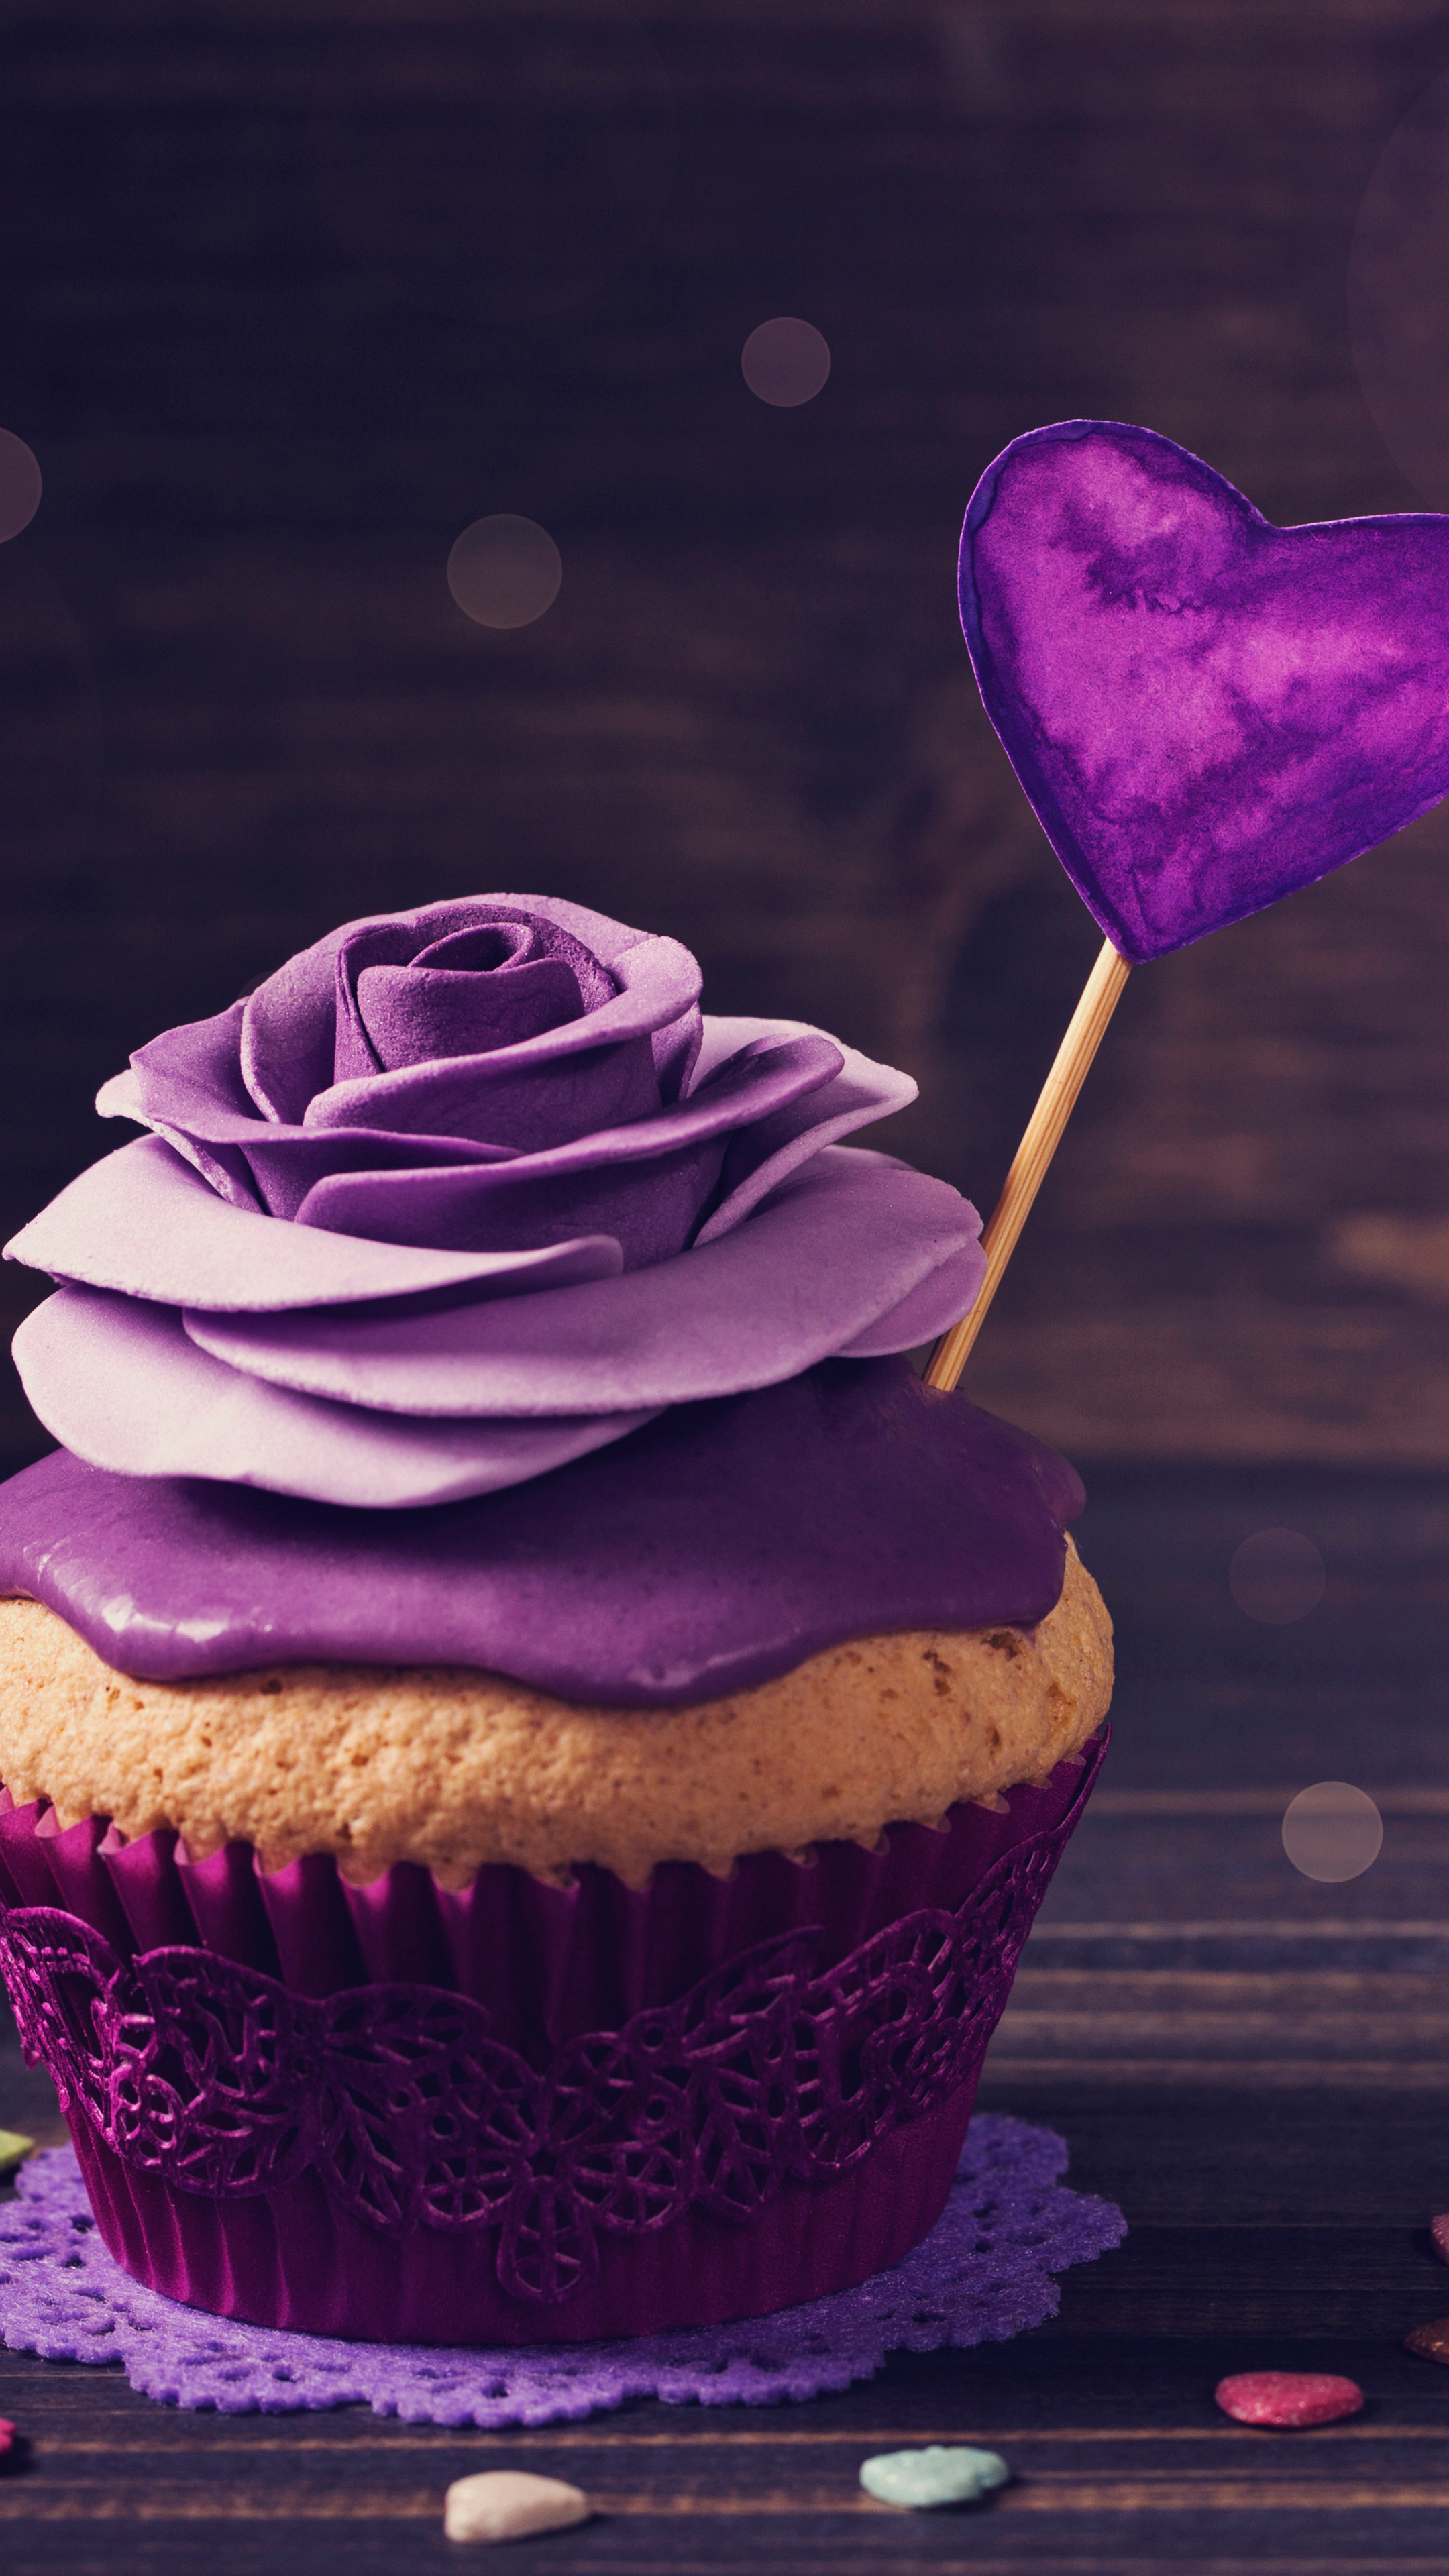 Roses cupcake, Xperia wallpapers, Premium HD images, Floral delight, 2160x3840 4K Phone